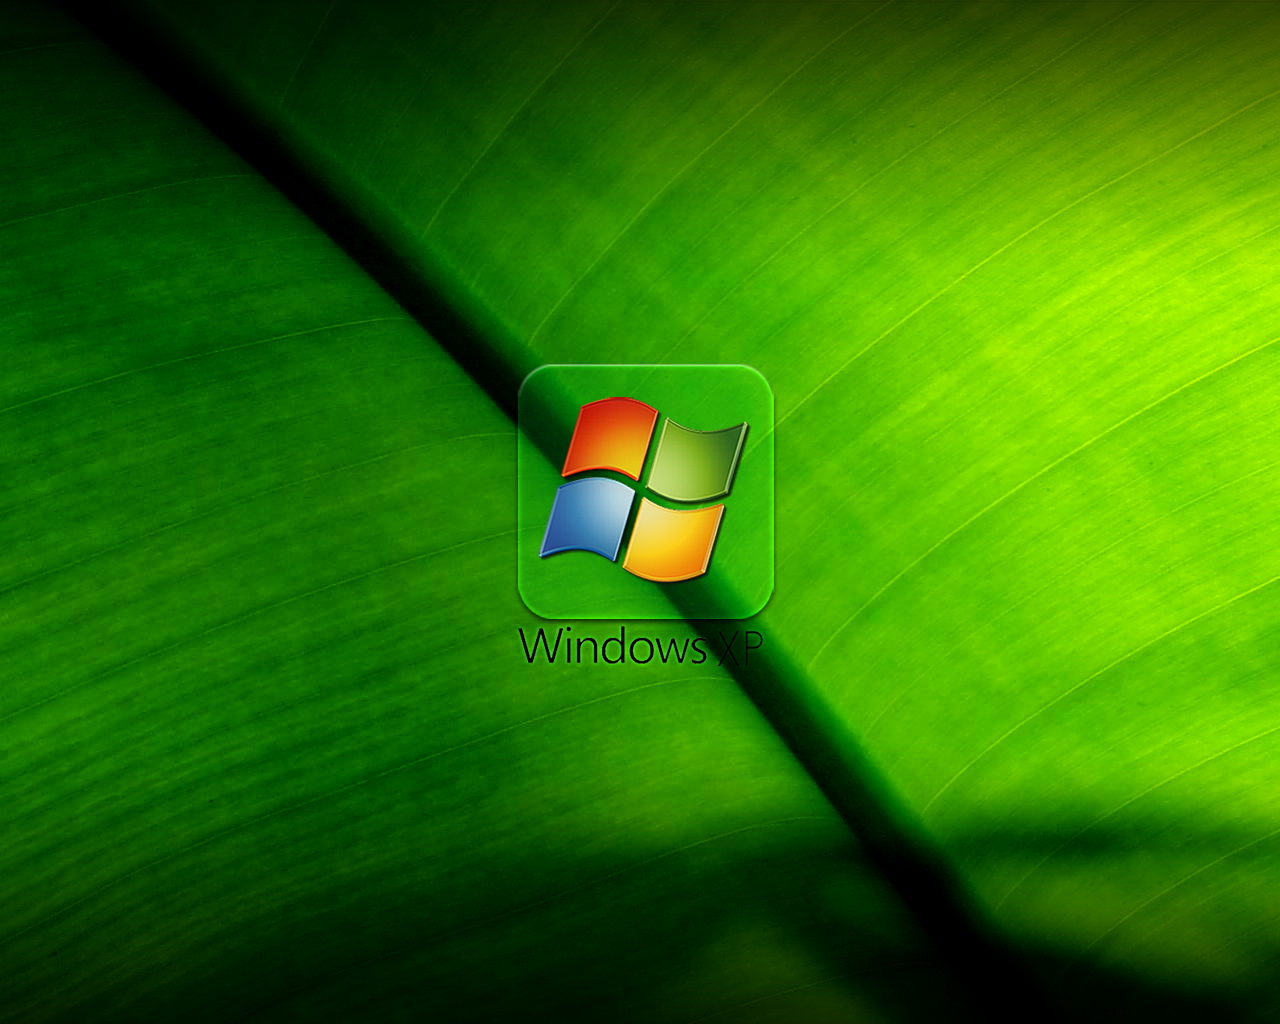 Windows Xp Image HD Wallpaper And Background Photos